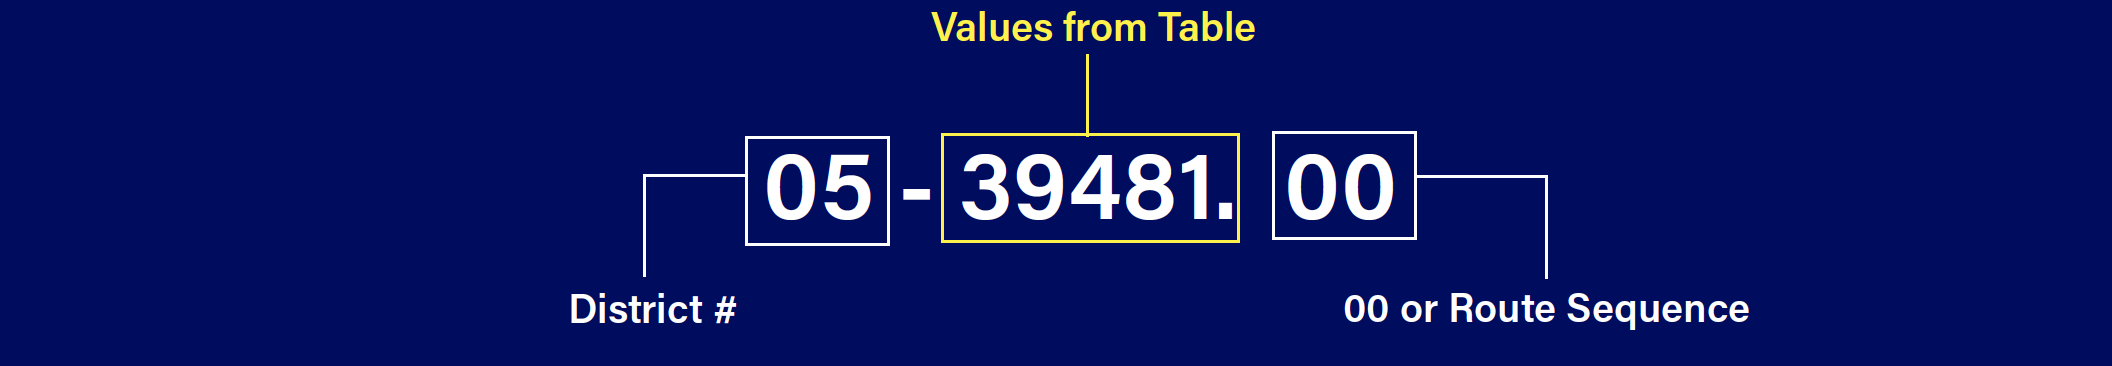 values from table